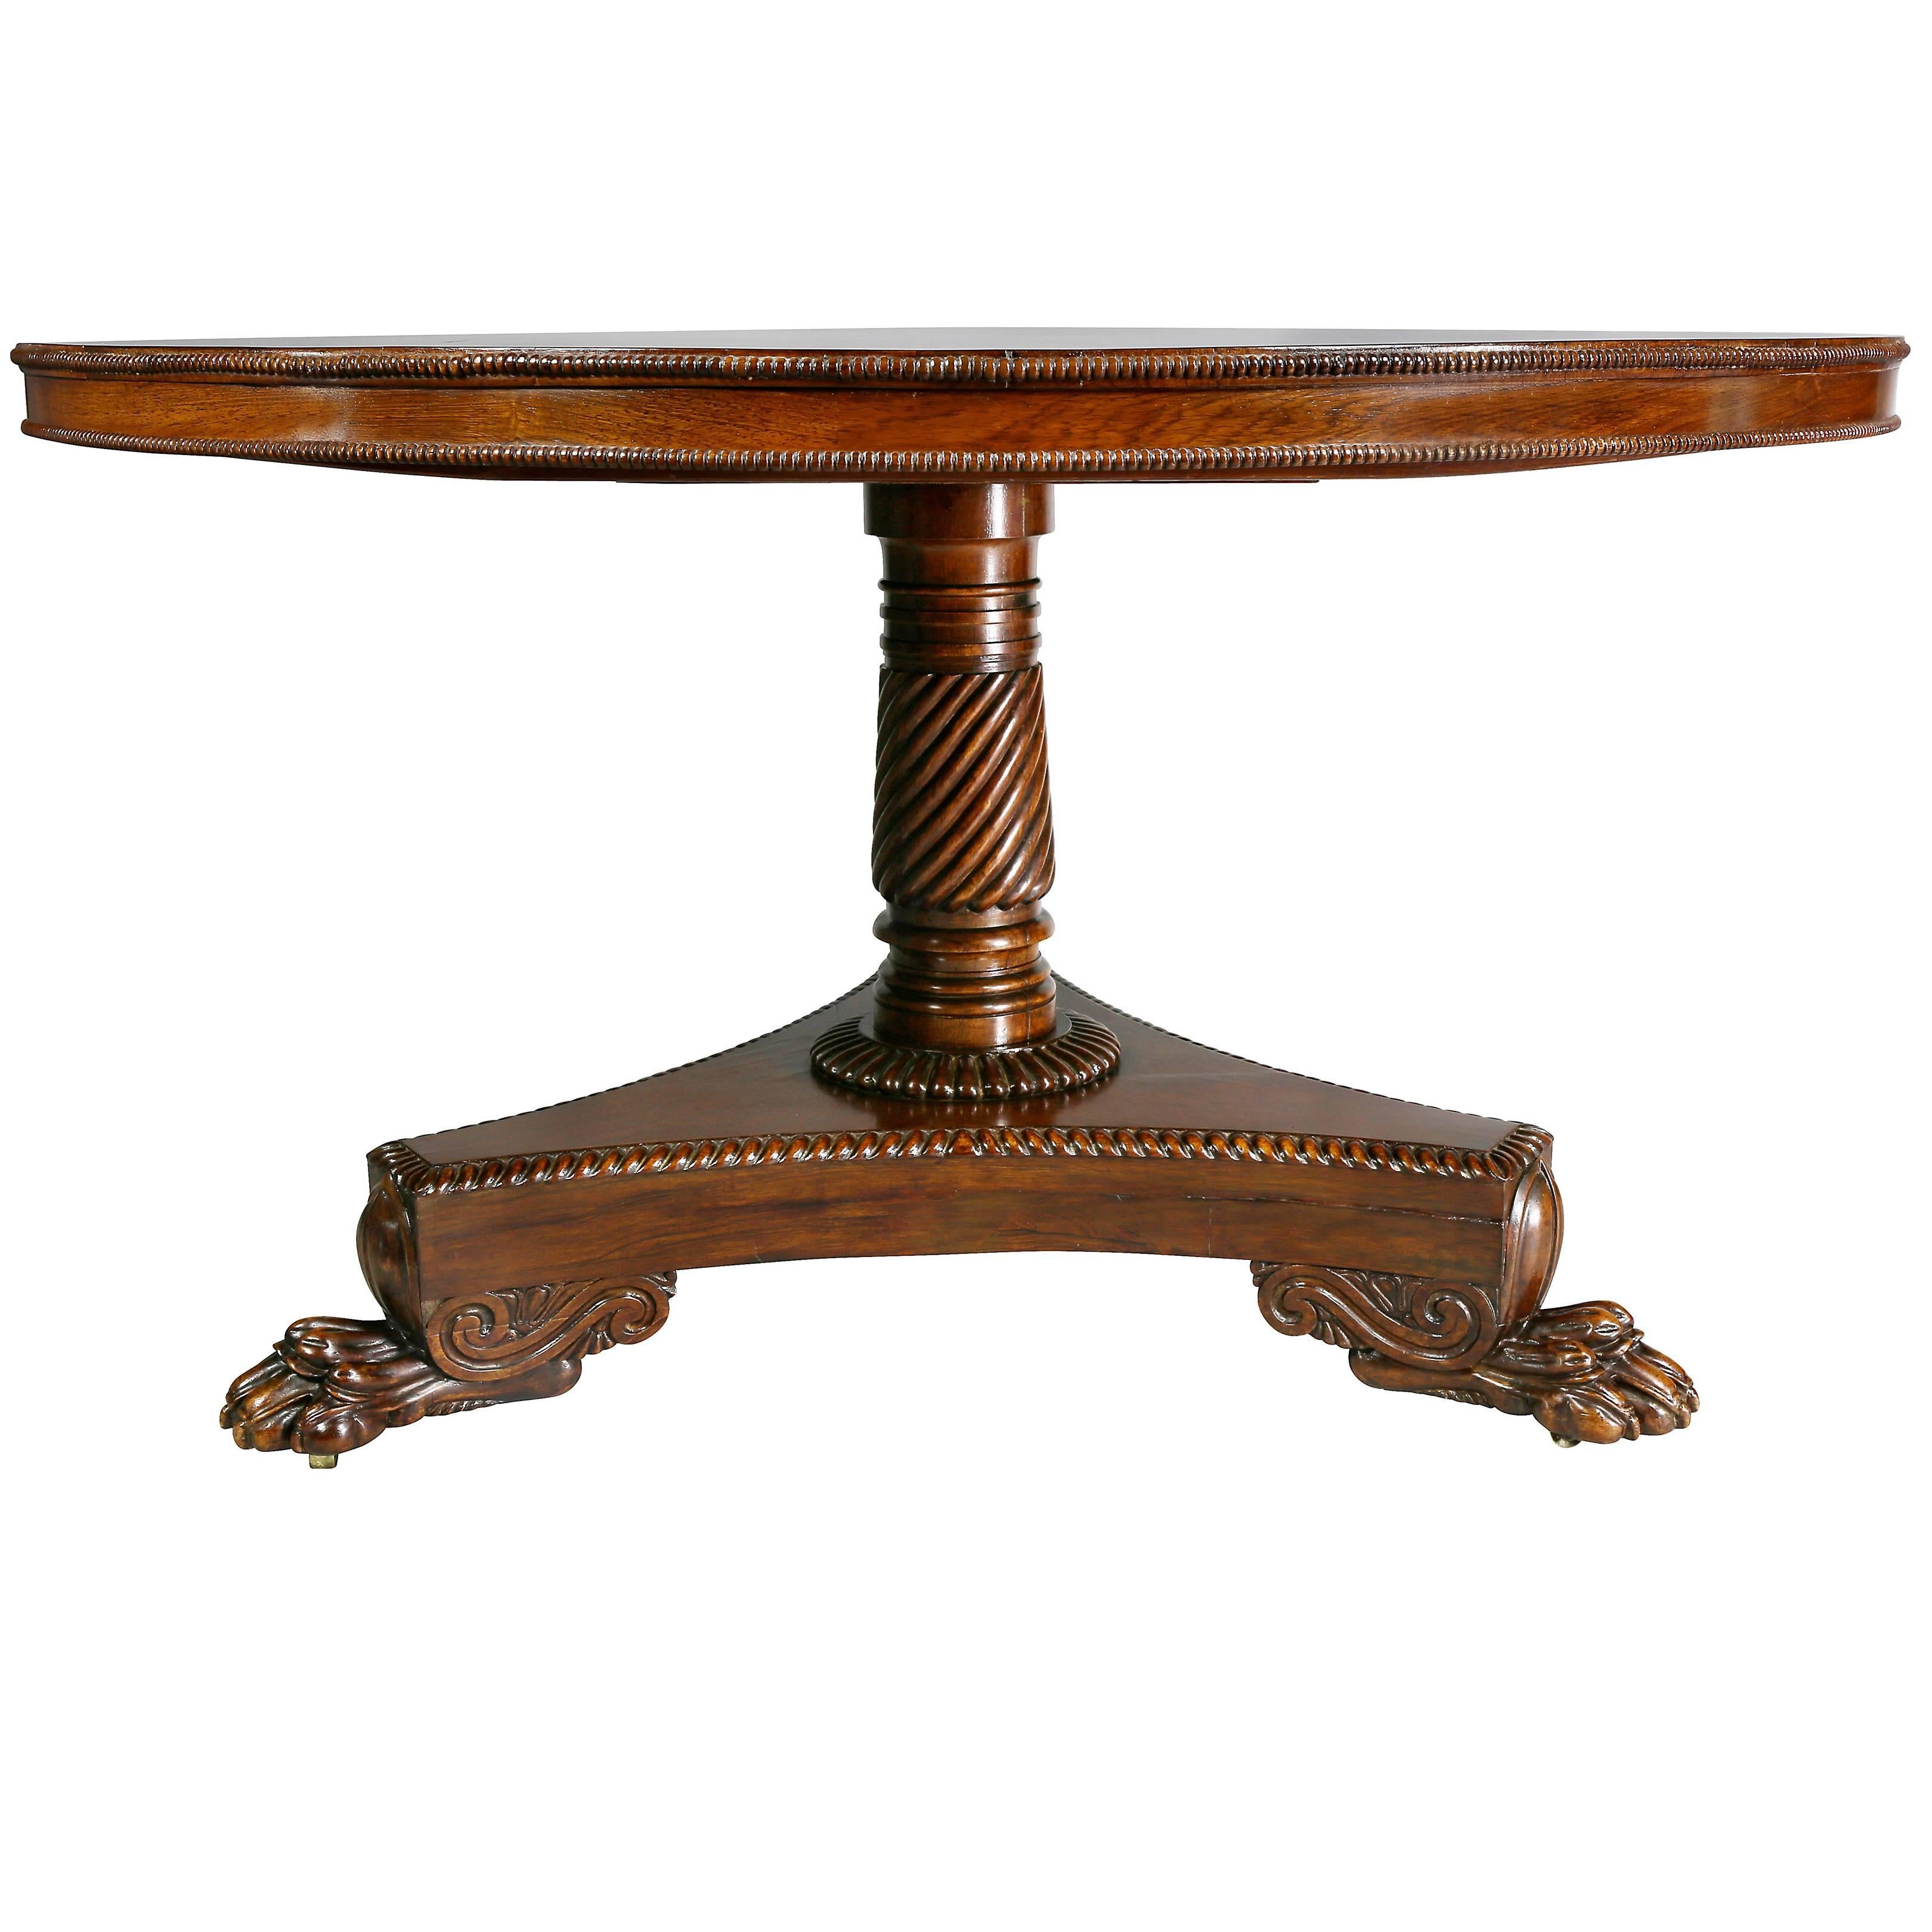 Circular tilt top with conforming beaded apron, spiral reeded support raised on a tripartite base with vitruvian scroll and claw feet.